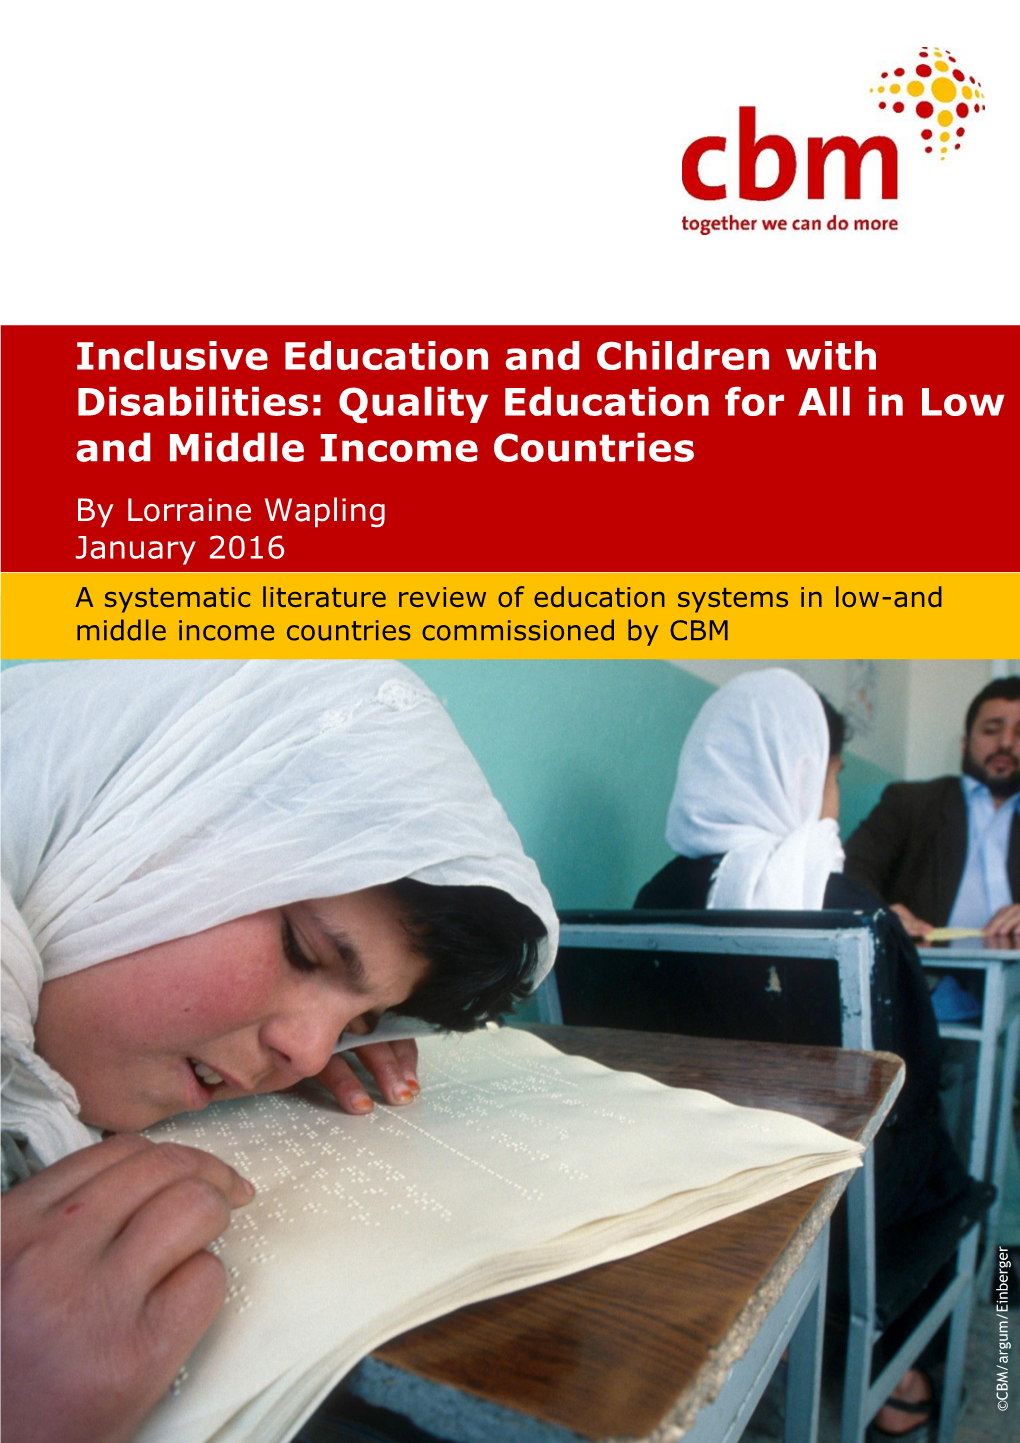 Quality Education for All in Low and Middle Income Countries by Lorraine Wapling January 2016